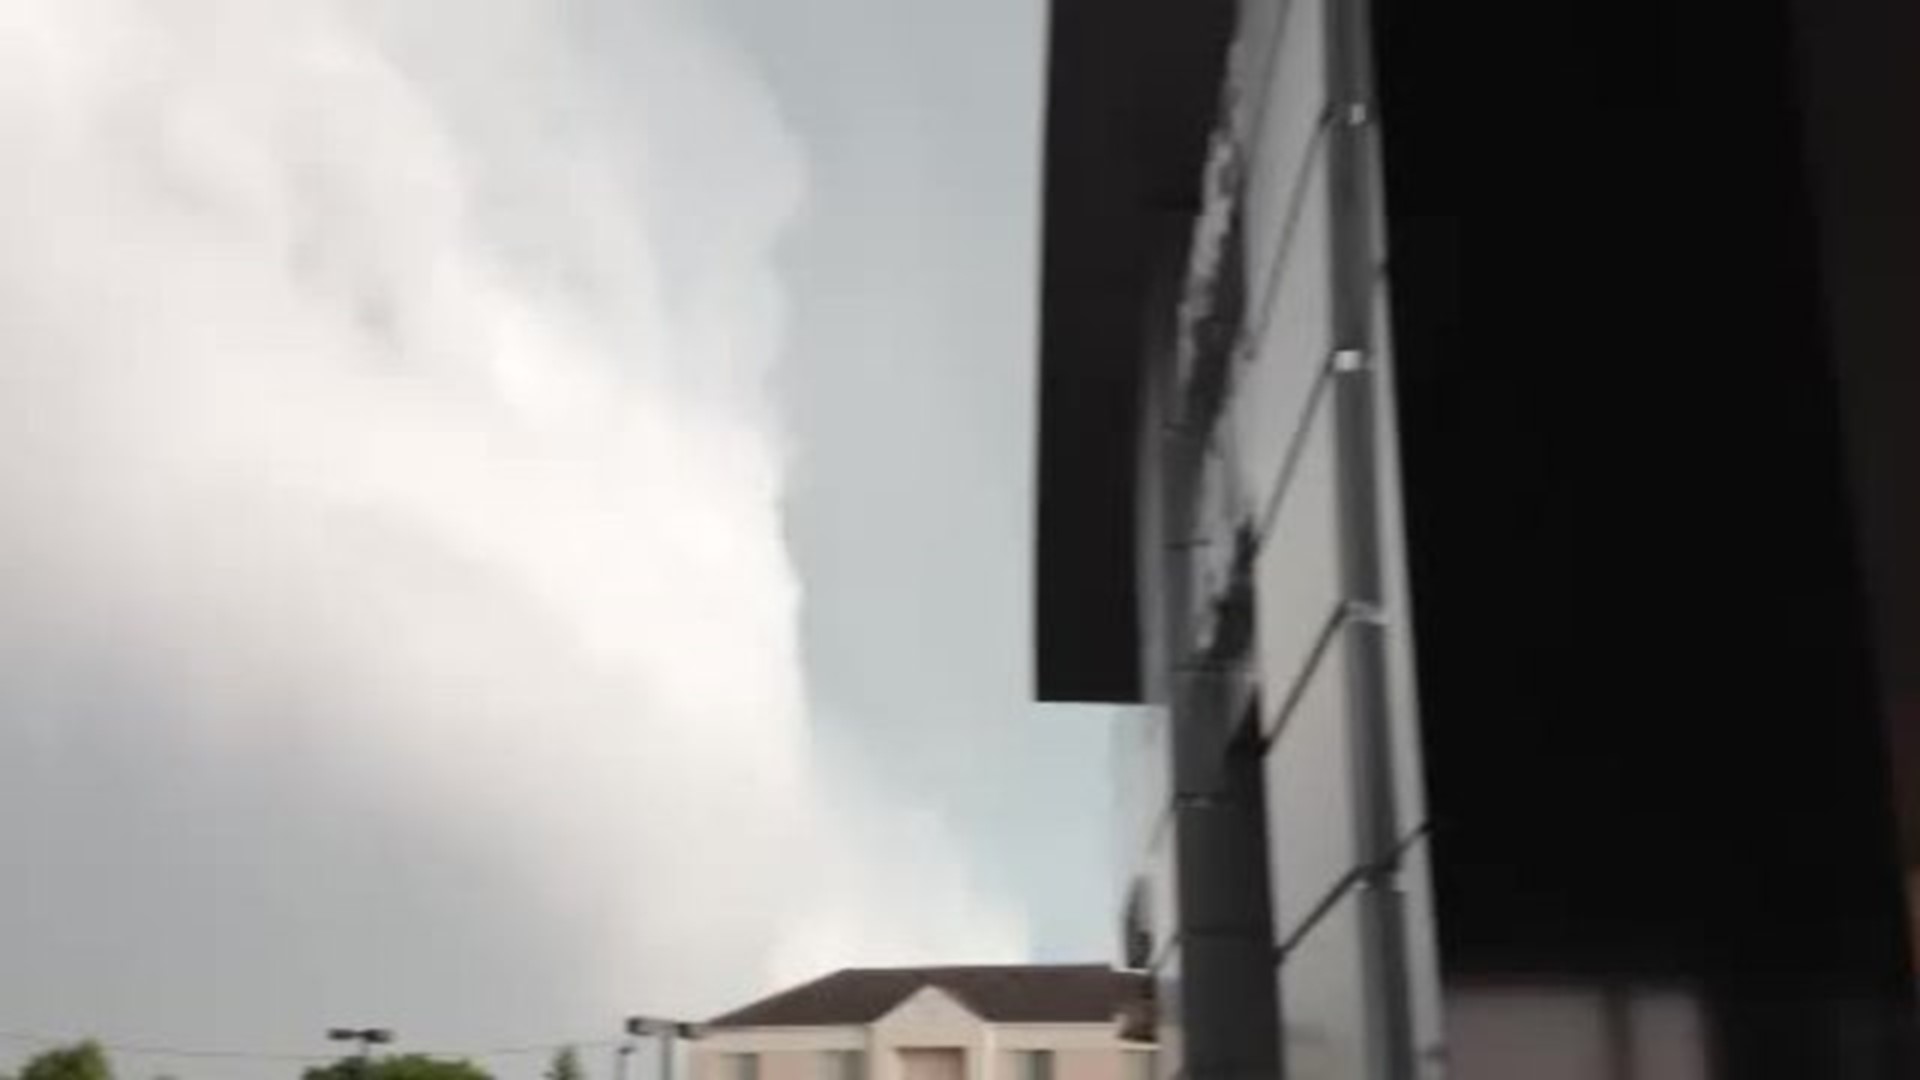 June 24 storm video from Taylor Martin  **WARNING** Language may offend some viewers